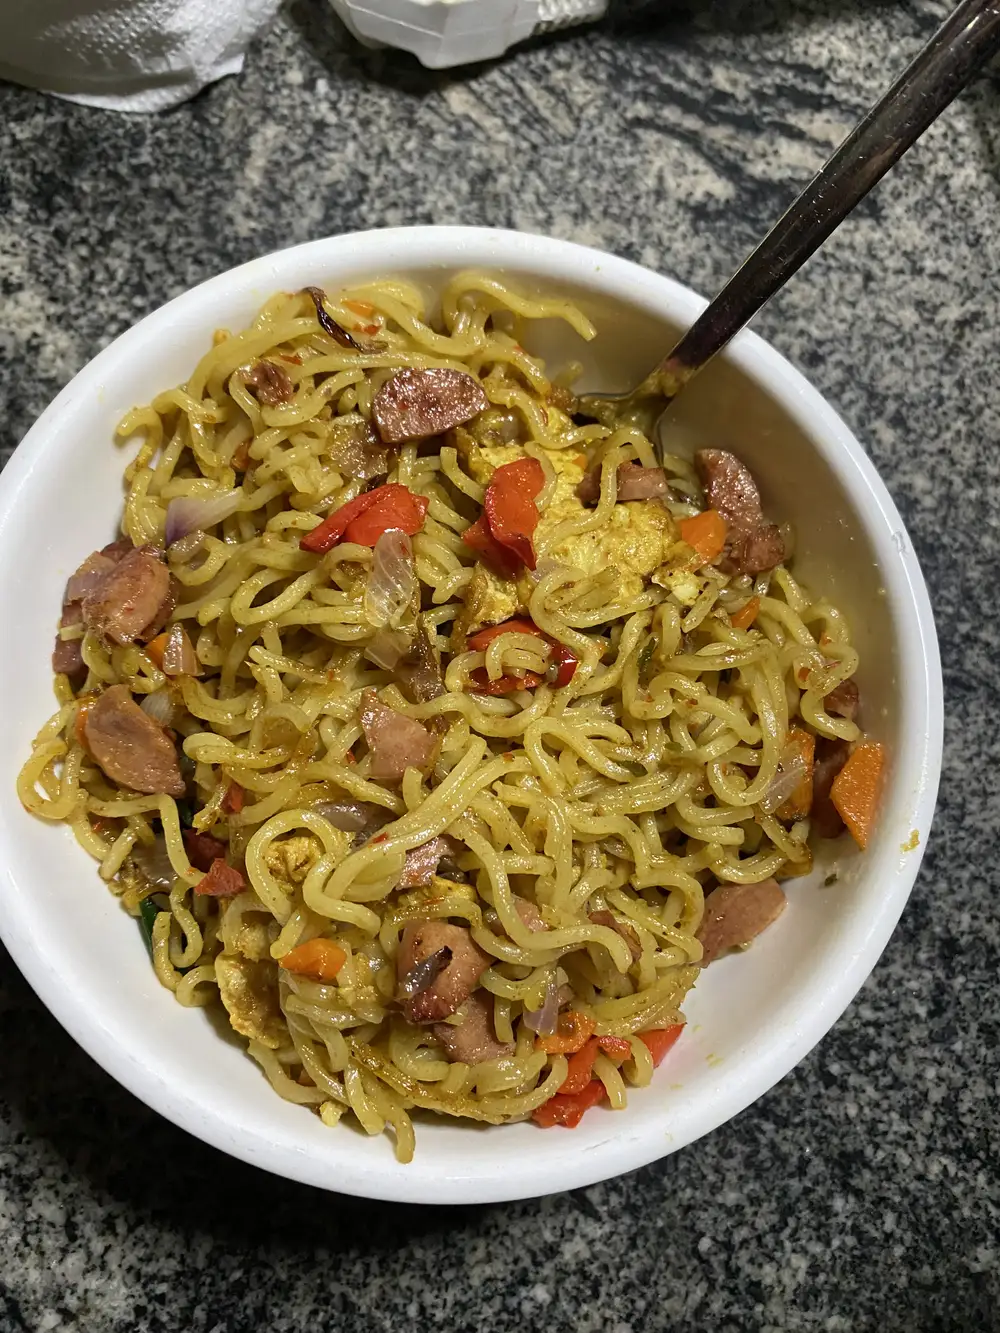 A plate of indomie